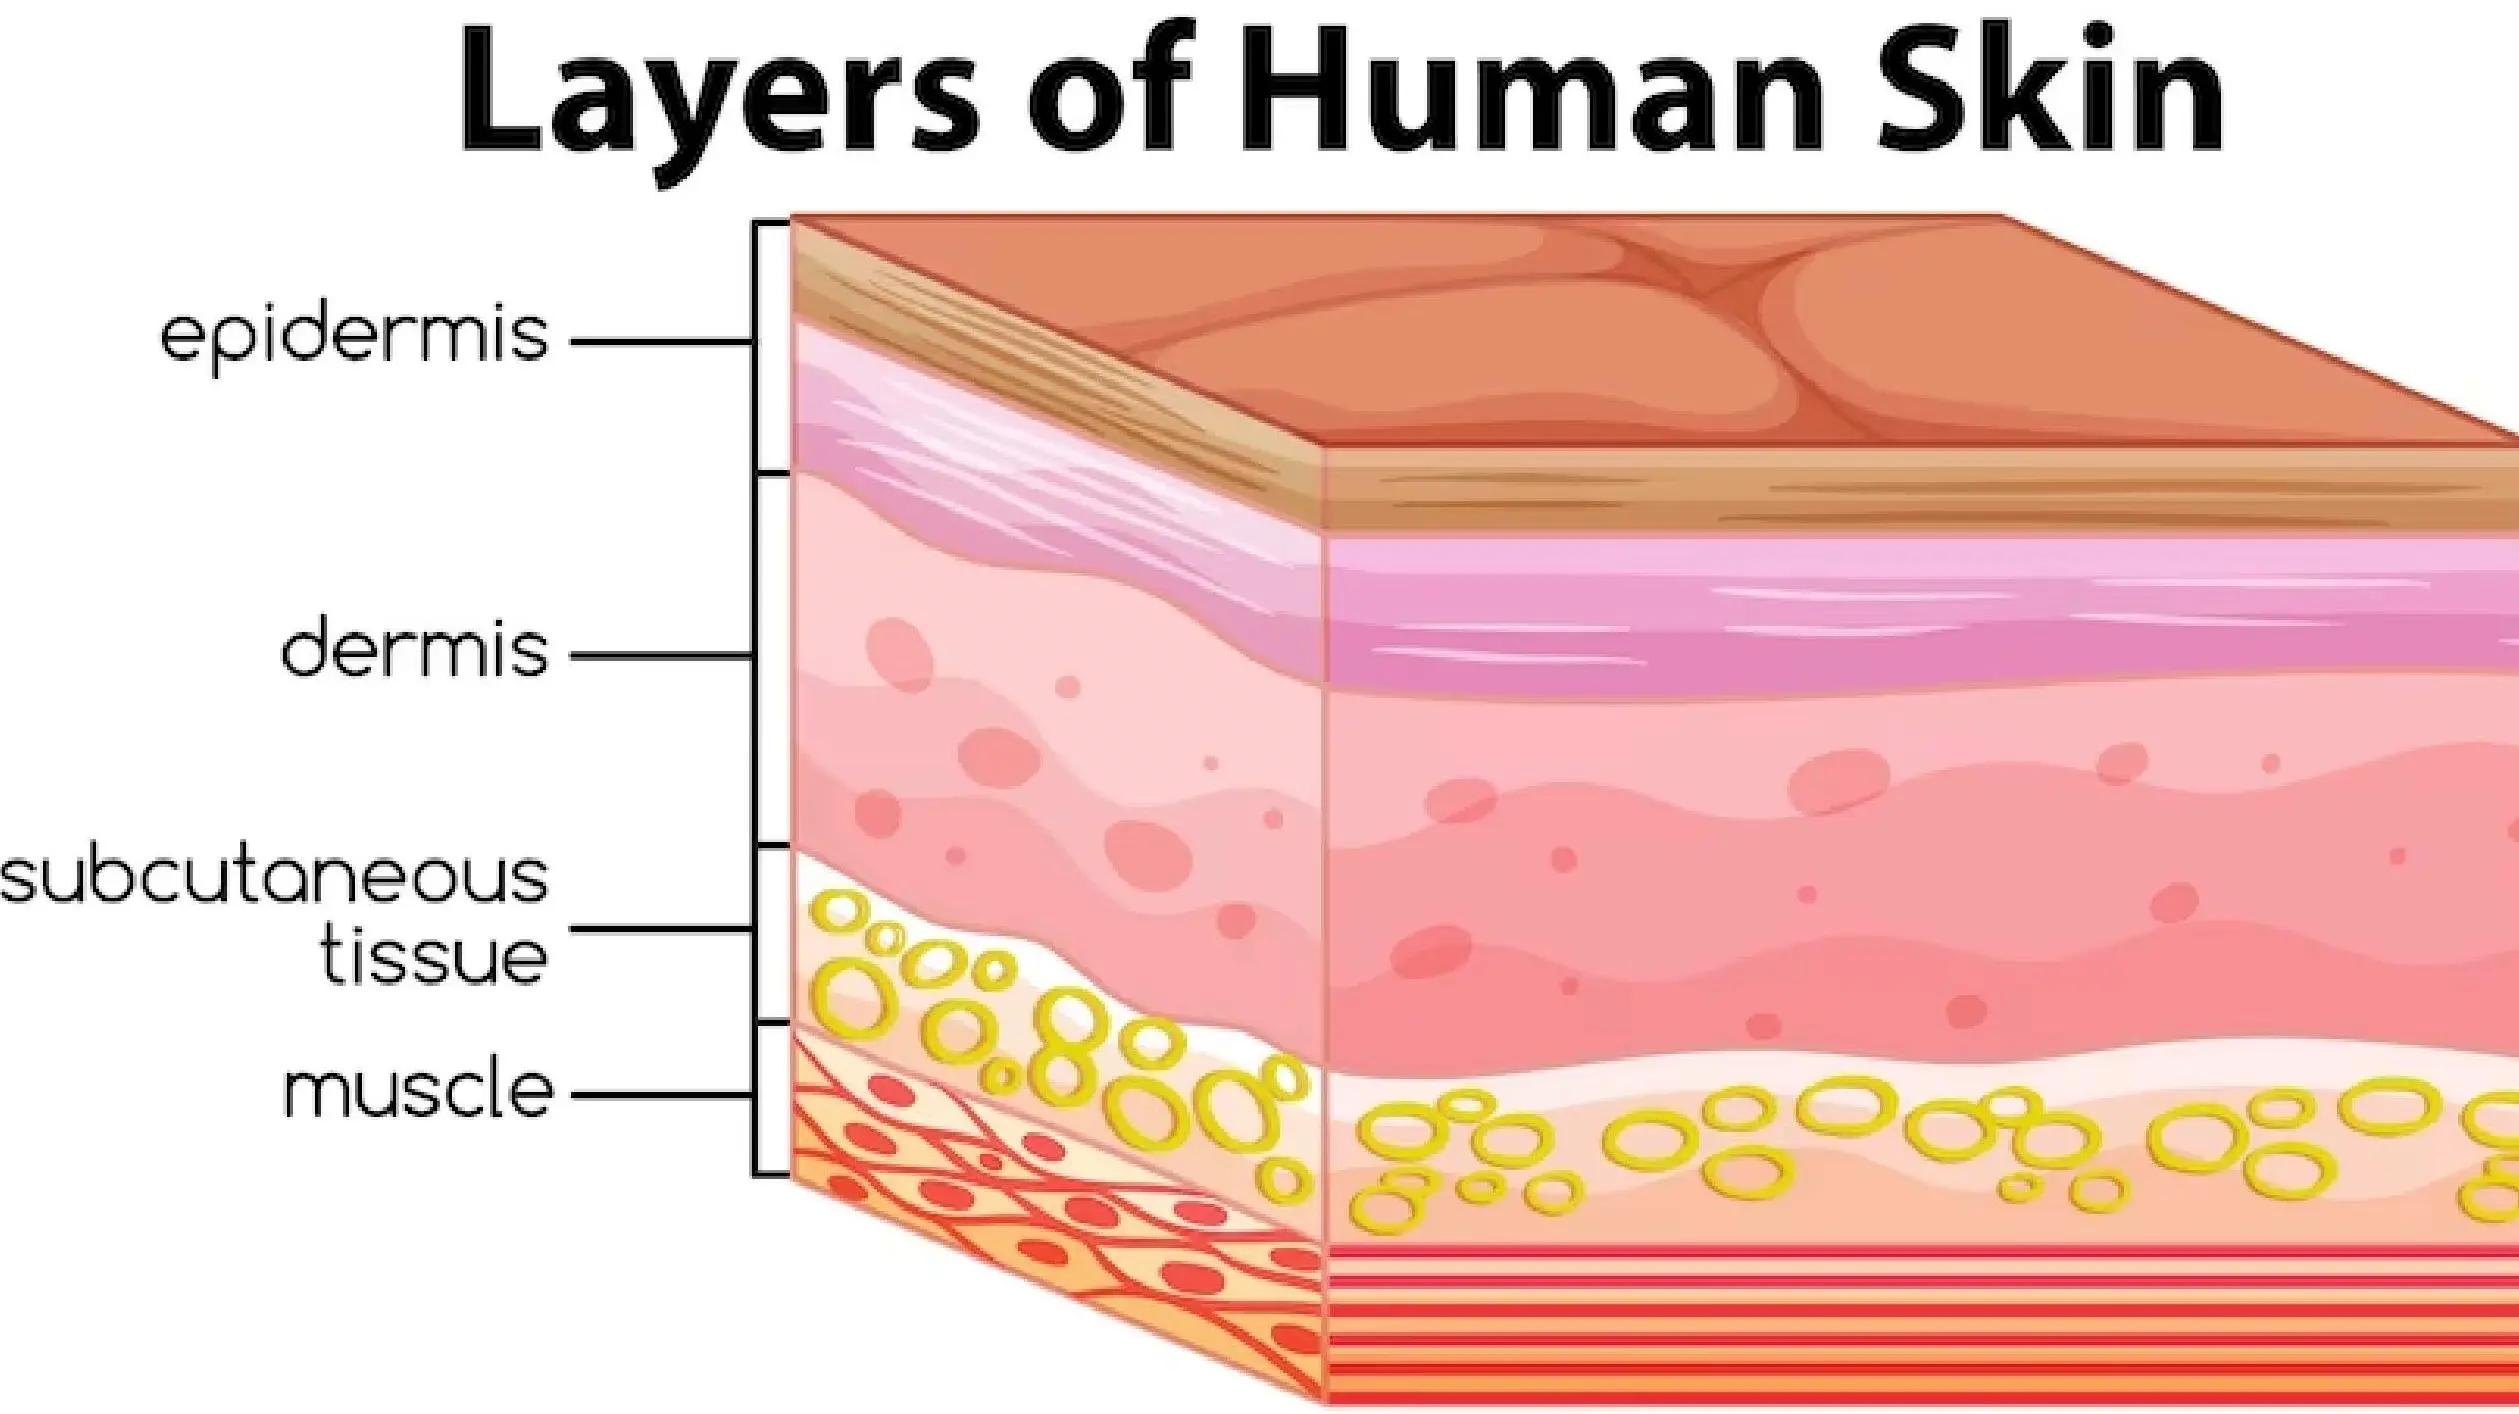 What Are The 7 Layers of Skin and their Functions